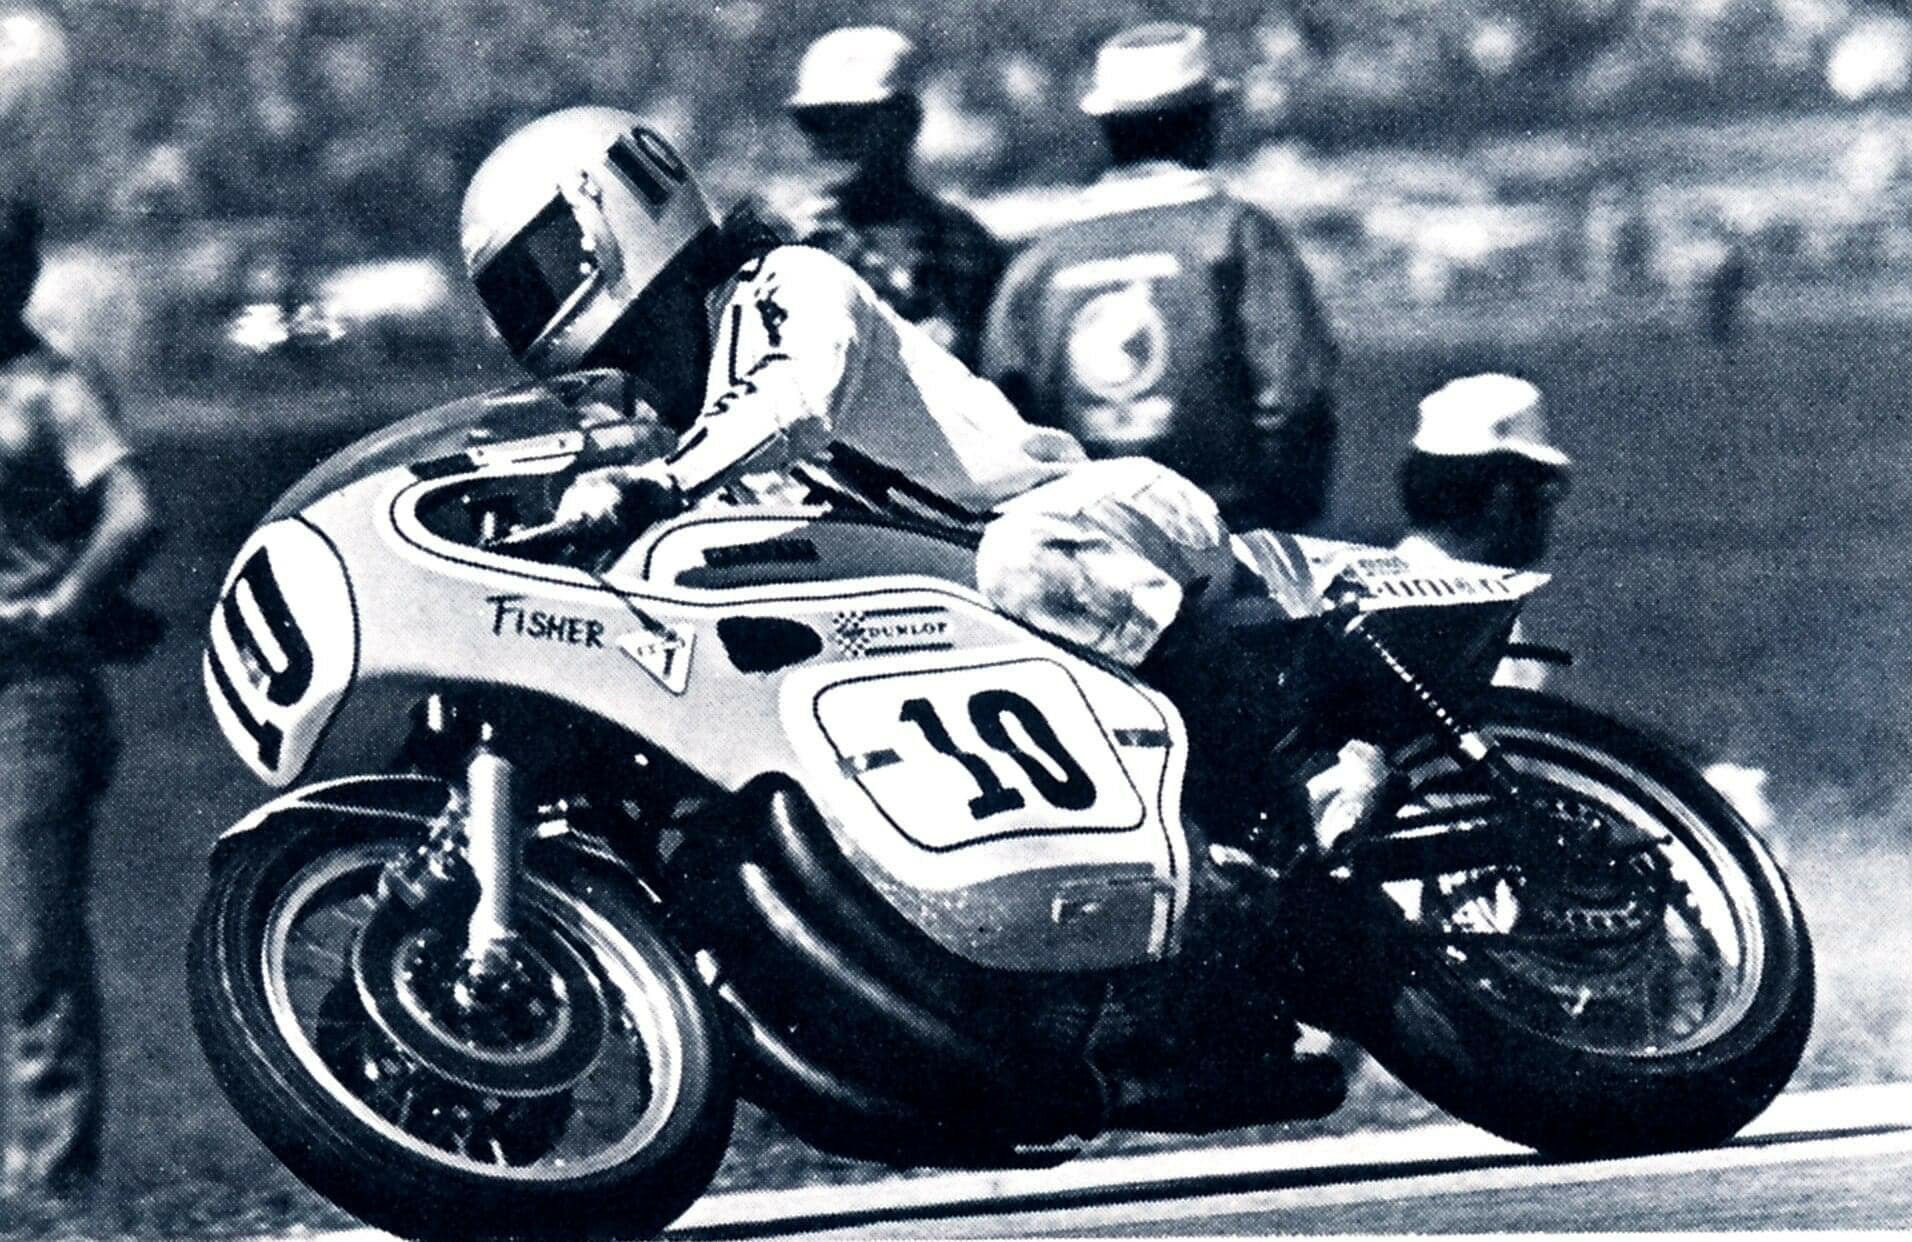 Gary Fisher (10) on the Honda CB750 he raced before switching to a Yamaha DT3 for the Loudon Classic. Photo courtesy Kimberly Rivers.